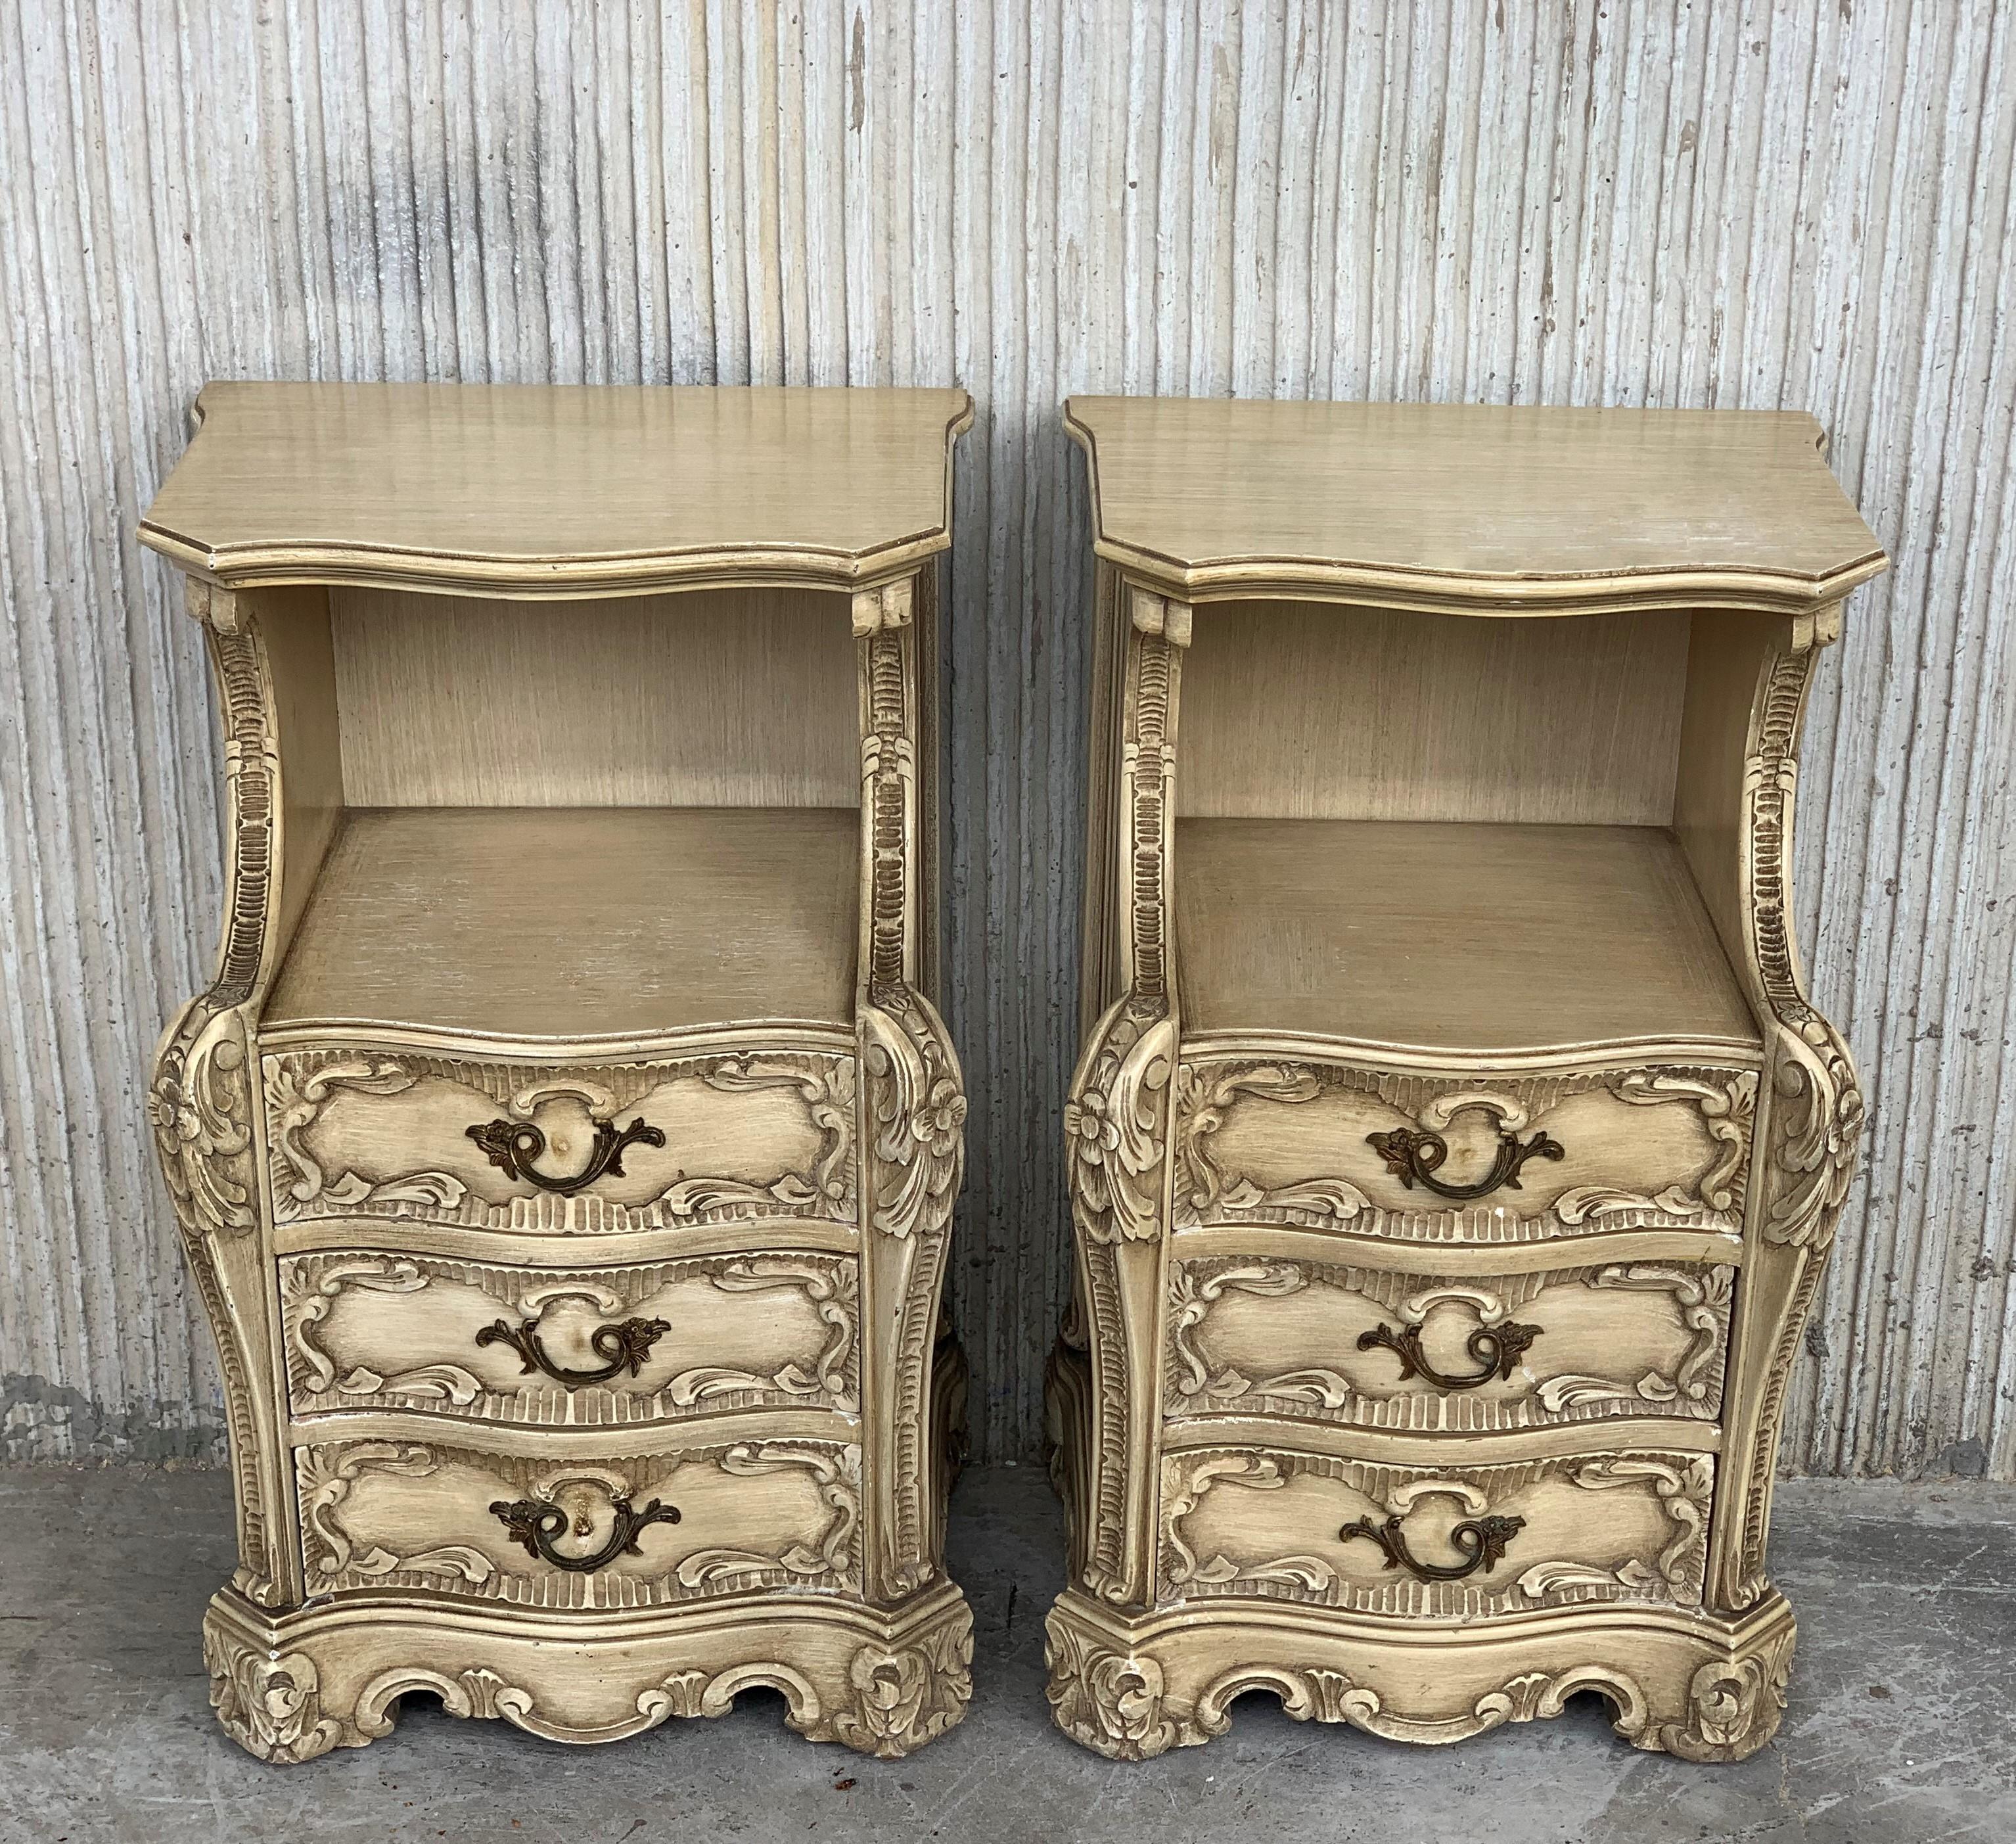 Carved French Rococo style pair of nightstands with open shelve and three drawers, circa 1930s.

The tables stands on four ornately carved cabriole shaped legs and depicts a basket of roses on a beautiful carved wood scrolled base.